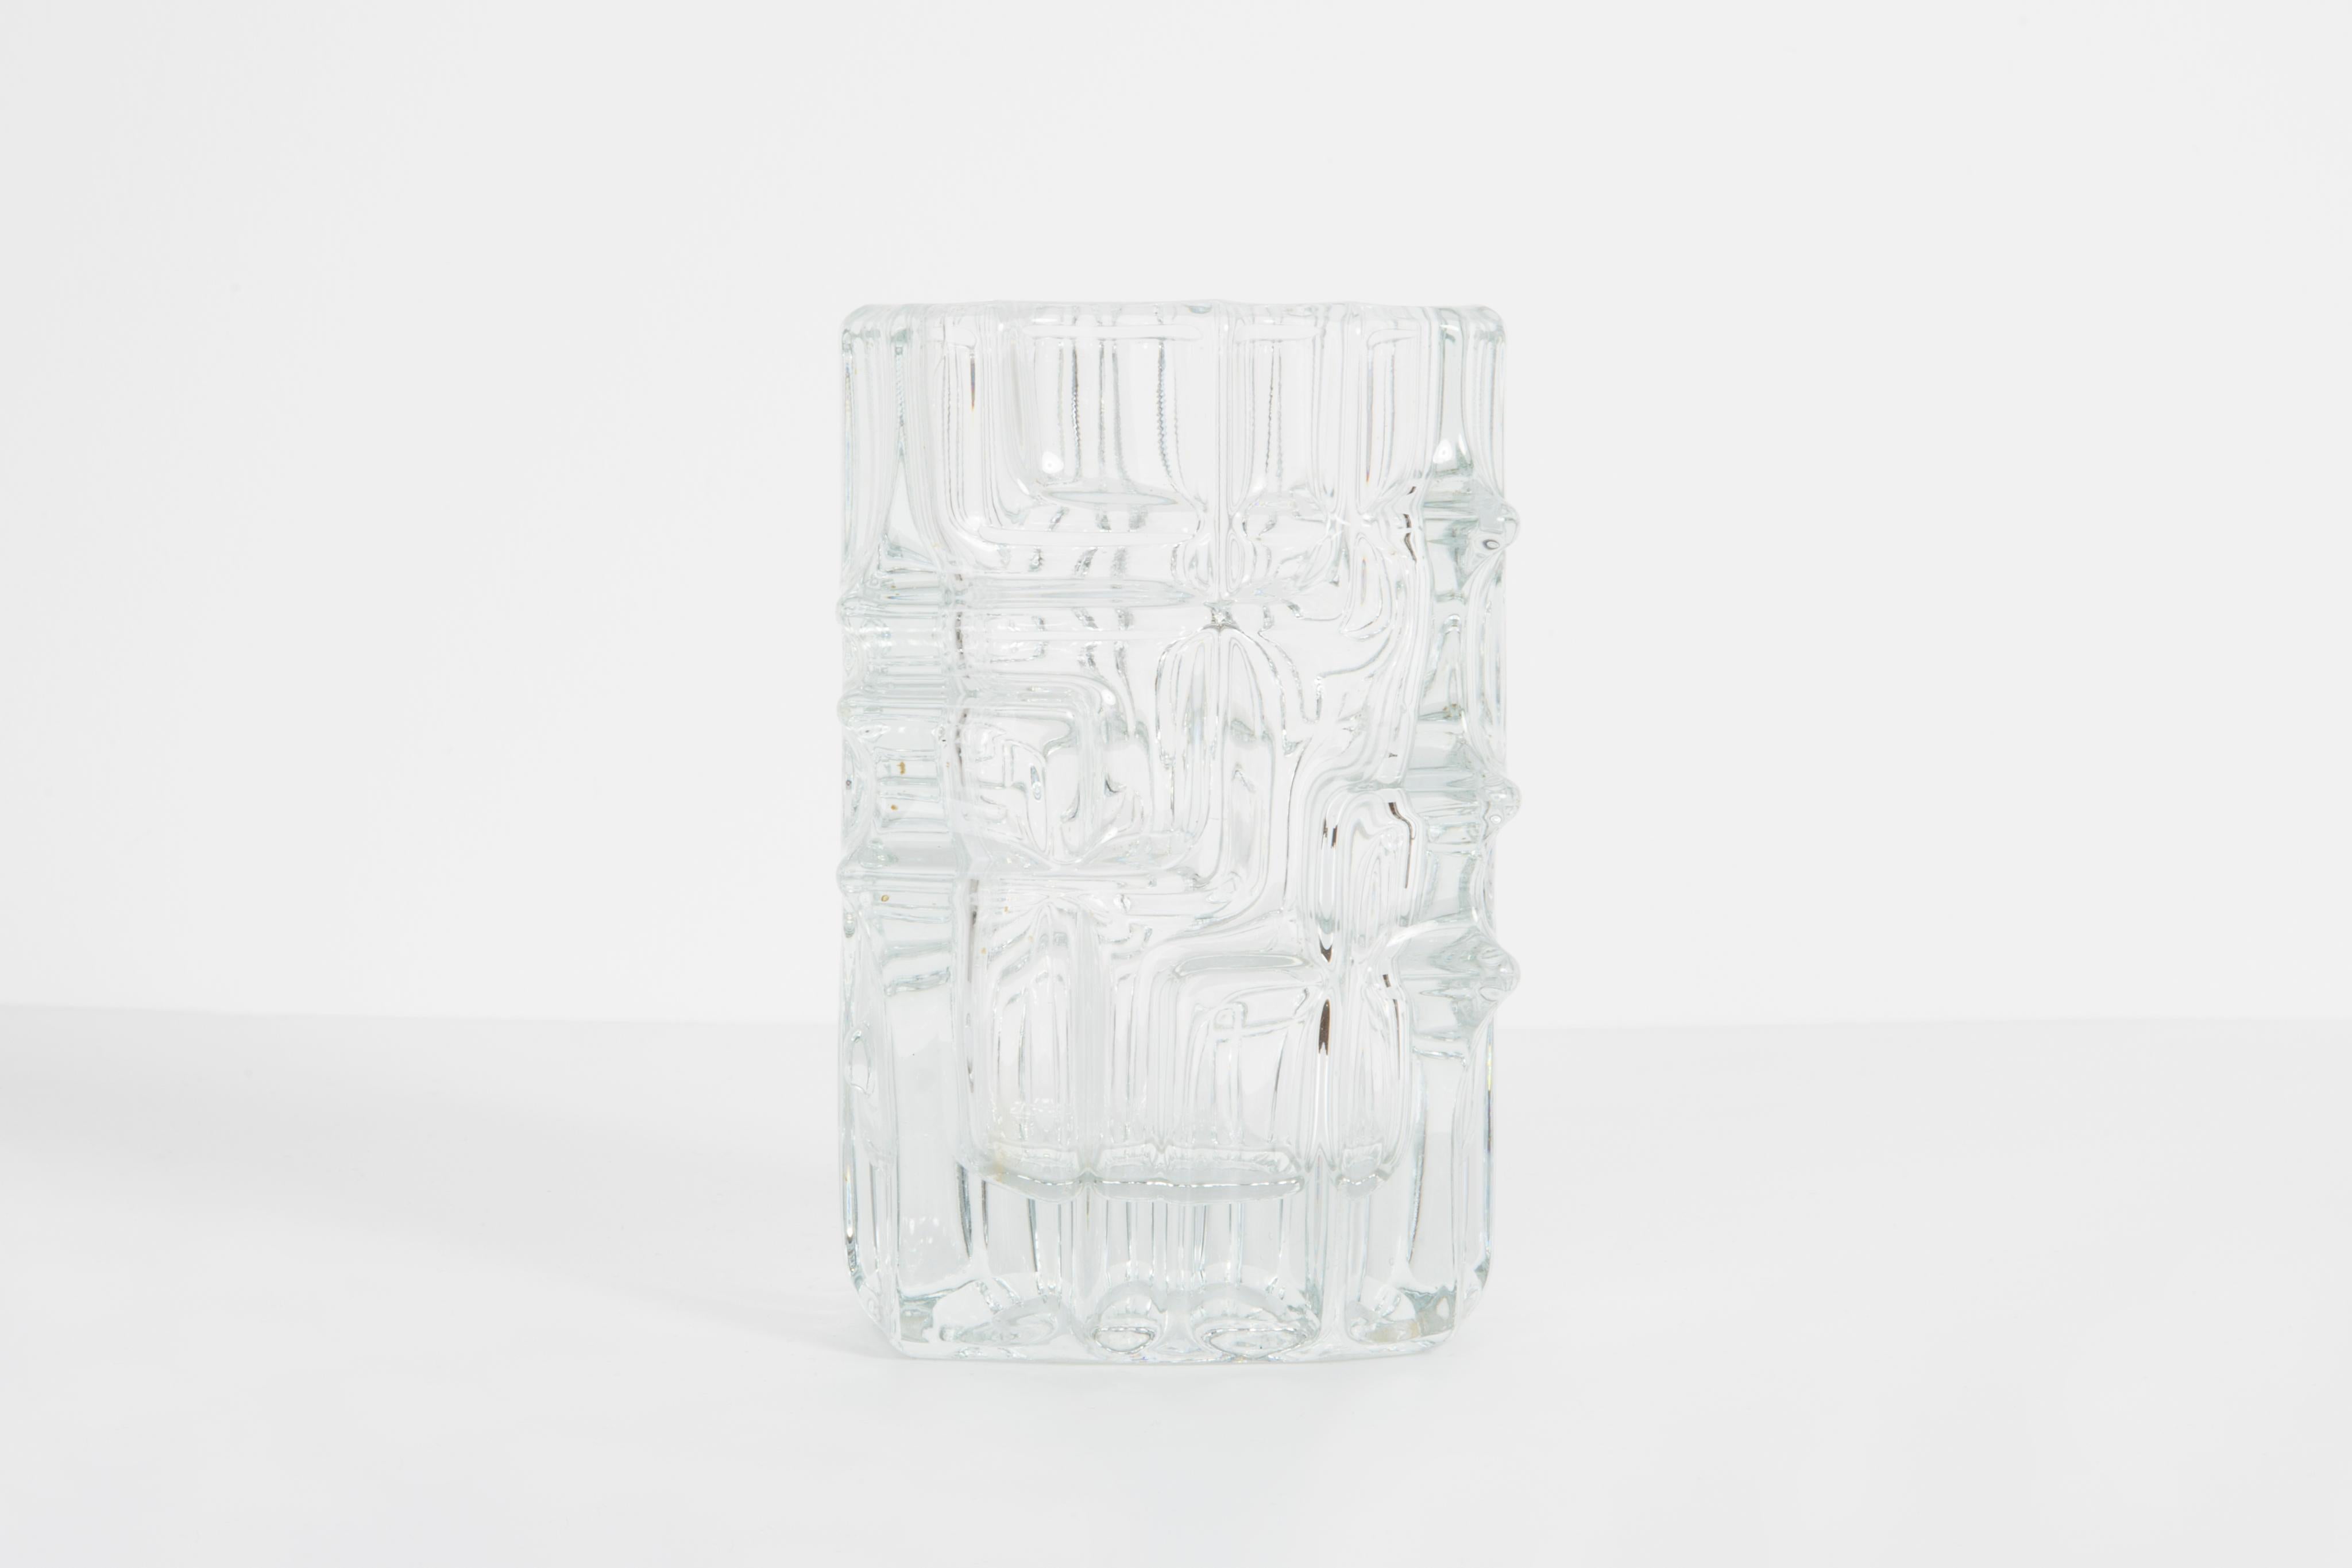 Transparent vase by Vladislav Urban - Czechoslovakian glass designer. Produced in 1960s.
Pressed glass in perfect condition. The vase looks like it has just been taken out of the box.
No jags, defects etc. The outer relief surface, the inner